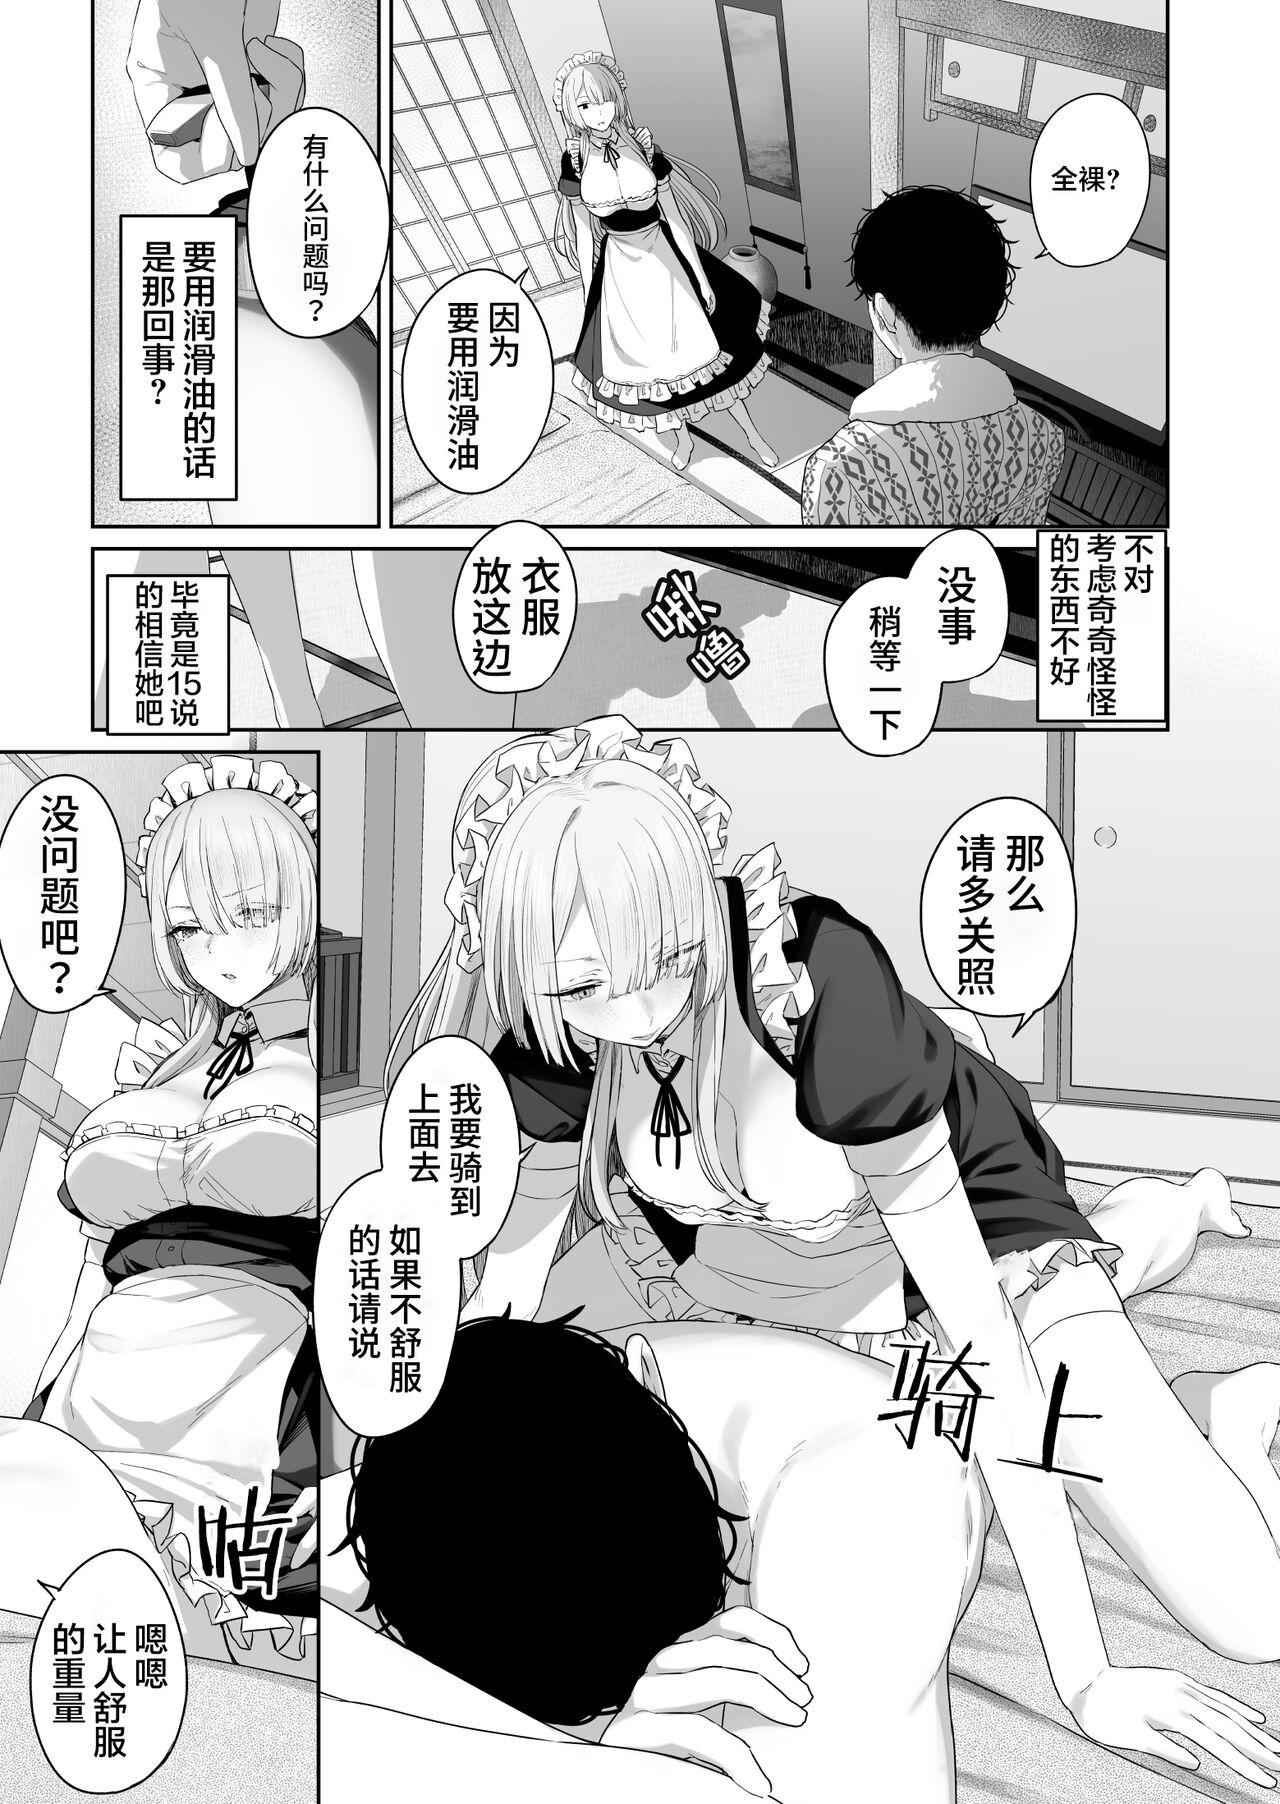 Pussyfucking AK15の進捗1 - Girls frontline Cameltoe - Page 4